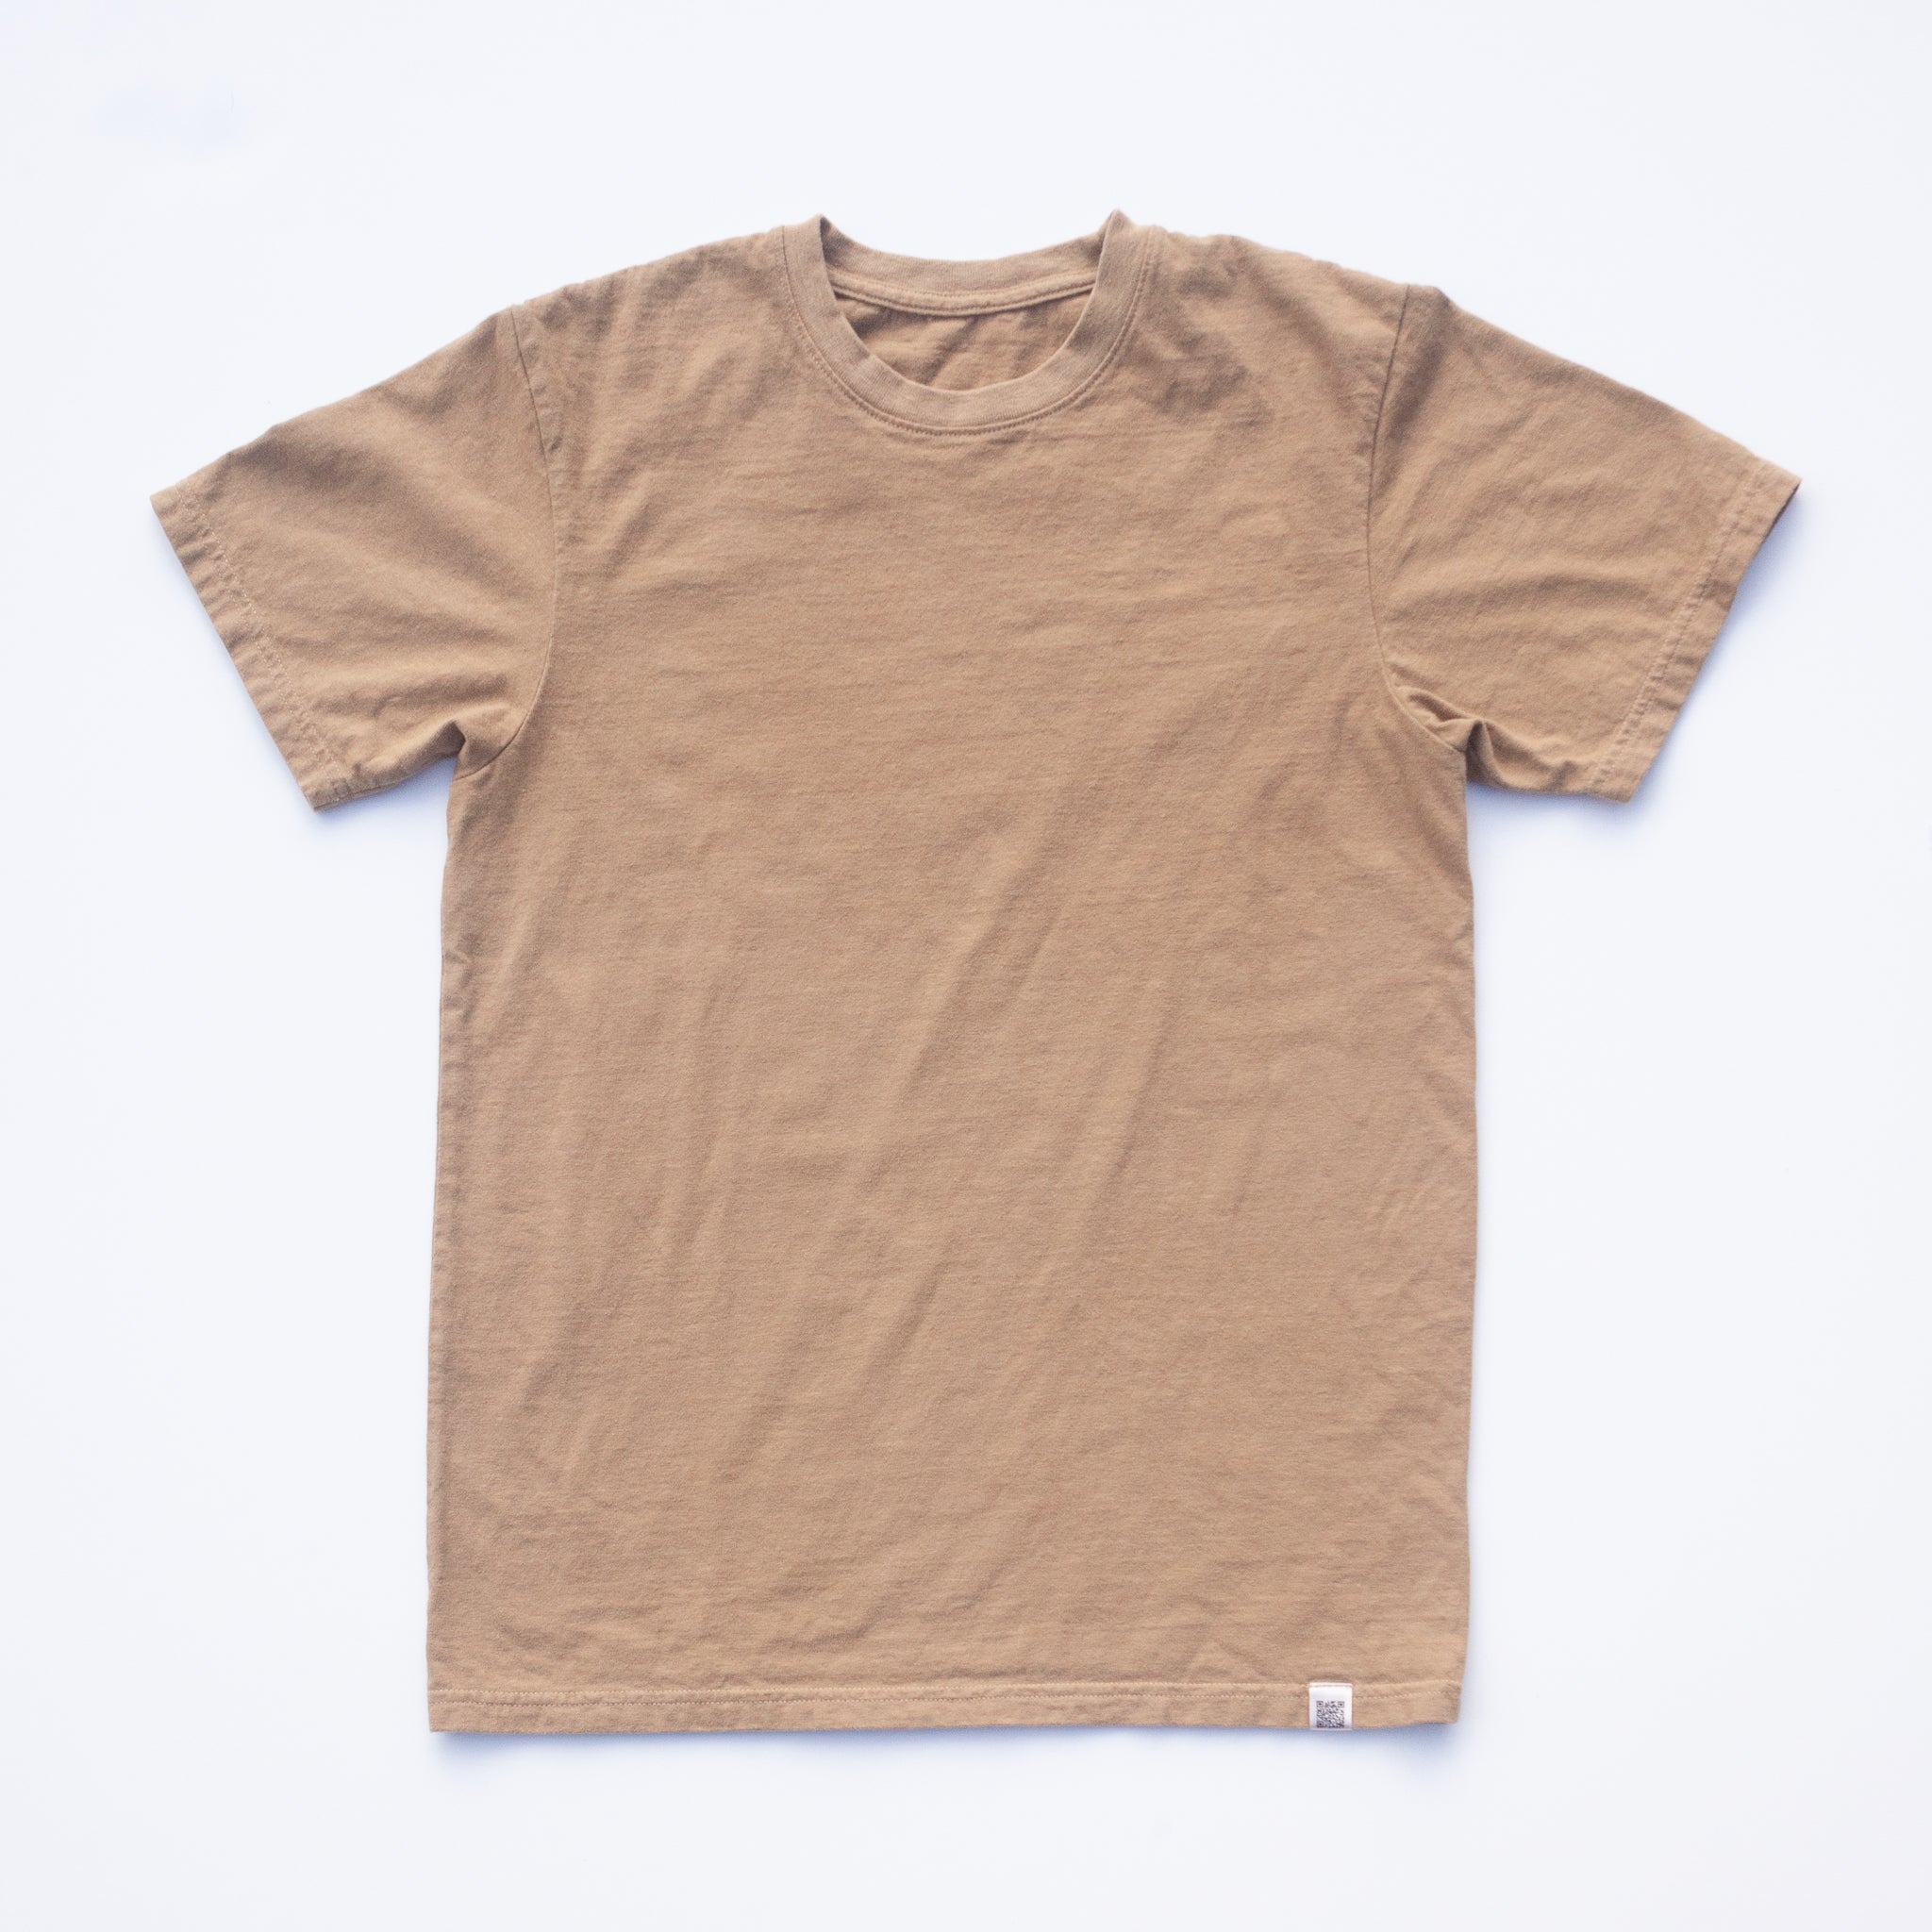 A Solid State Clothing North Carolina Black Walnut Shirt lies against a white background. The color of the shirt is a lighter, muted shade of brown